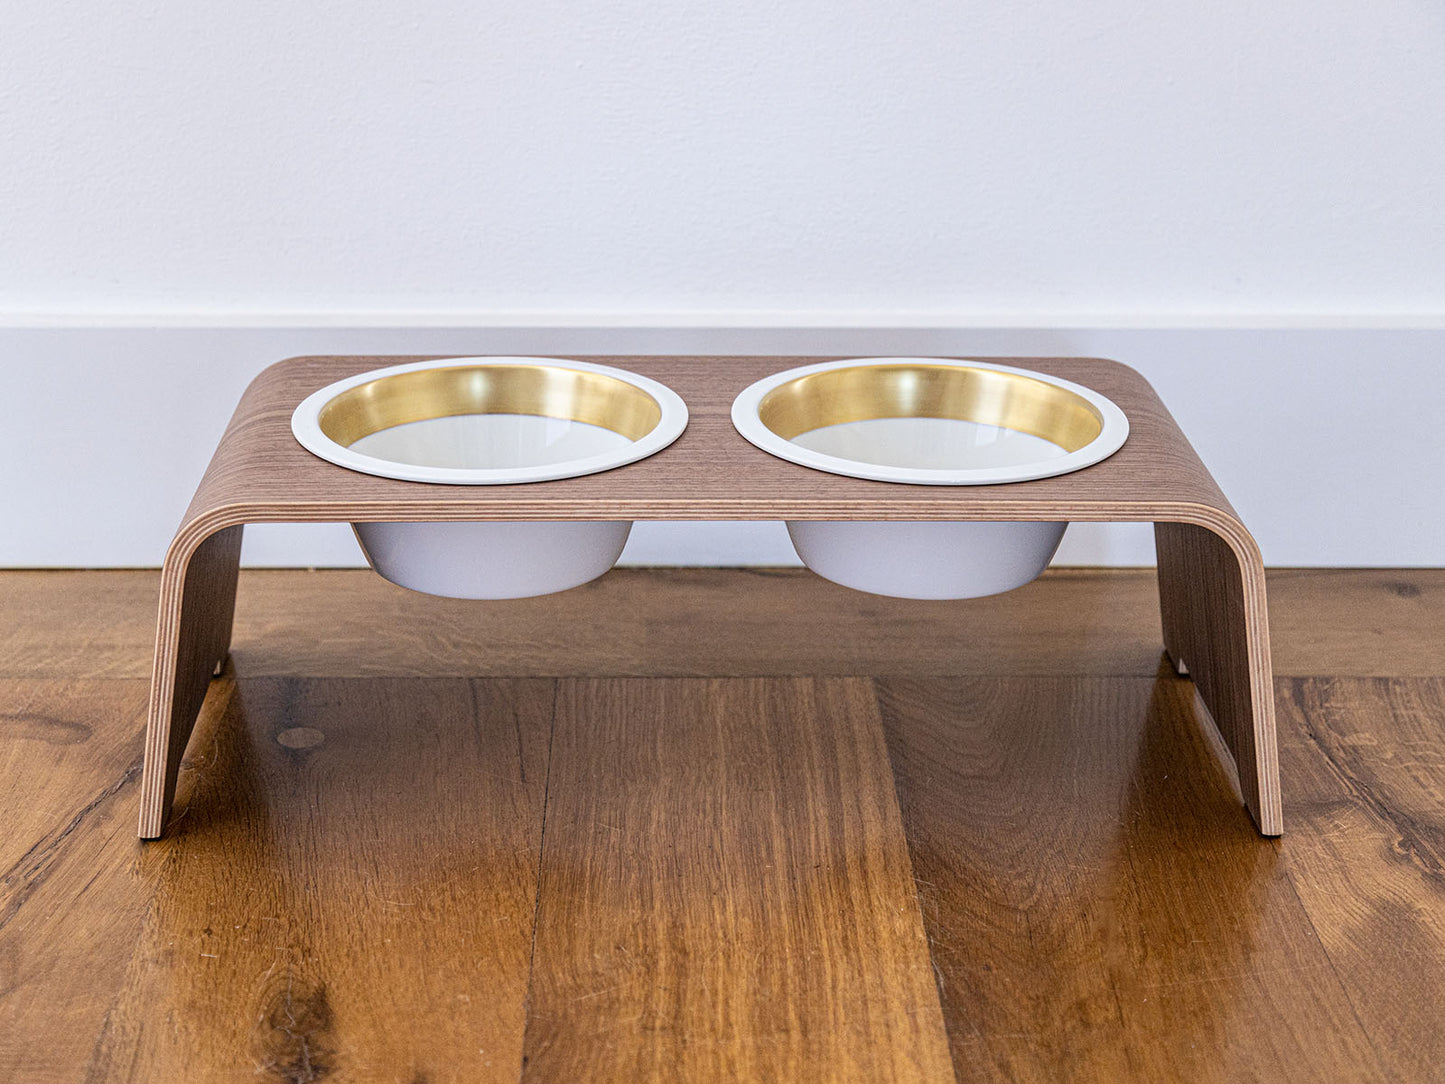 Surcharge GOLD Edition for a porcelain bowl of the dogBar® M